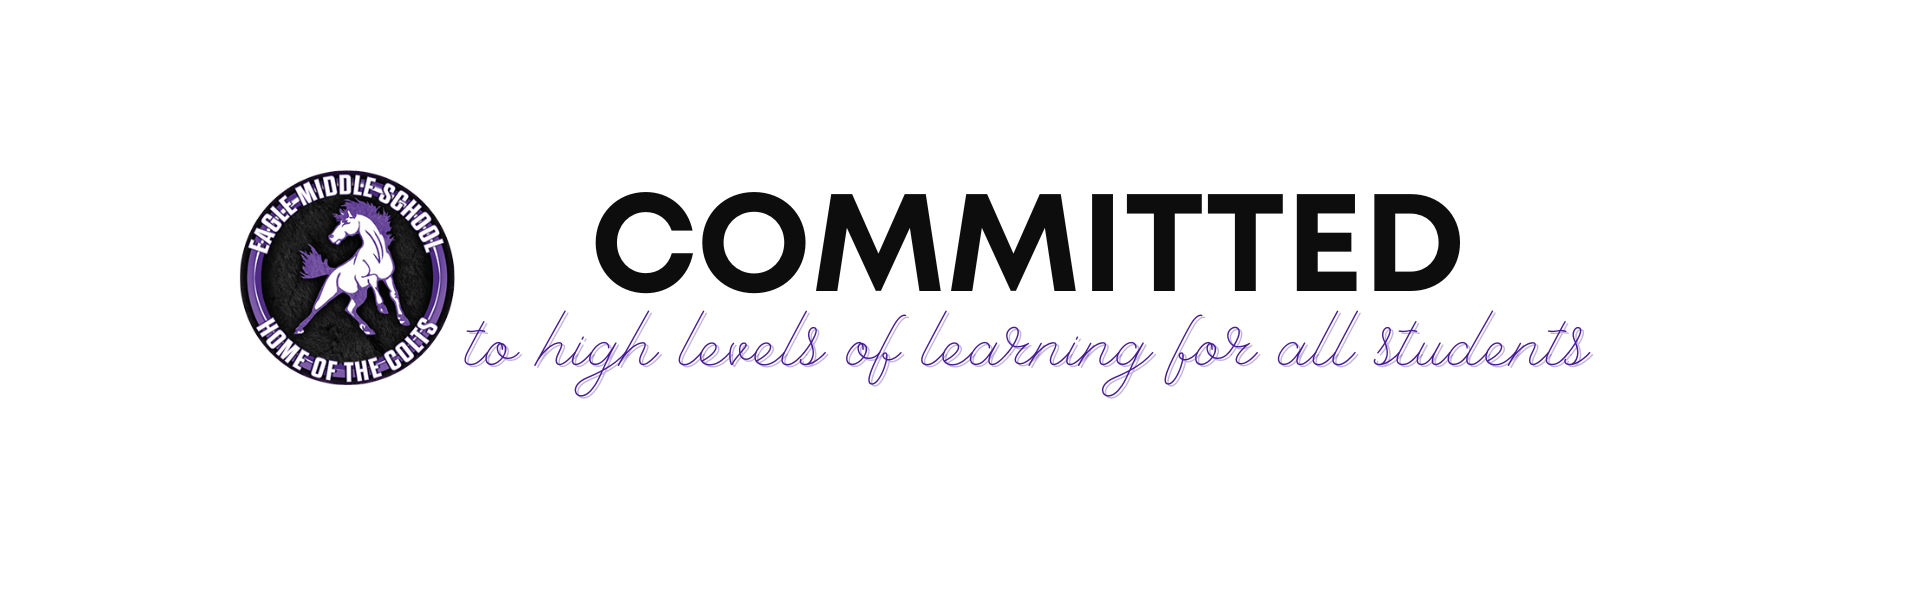 committed to high levels of learning for all students